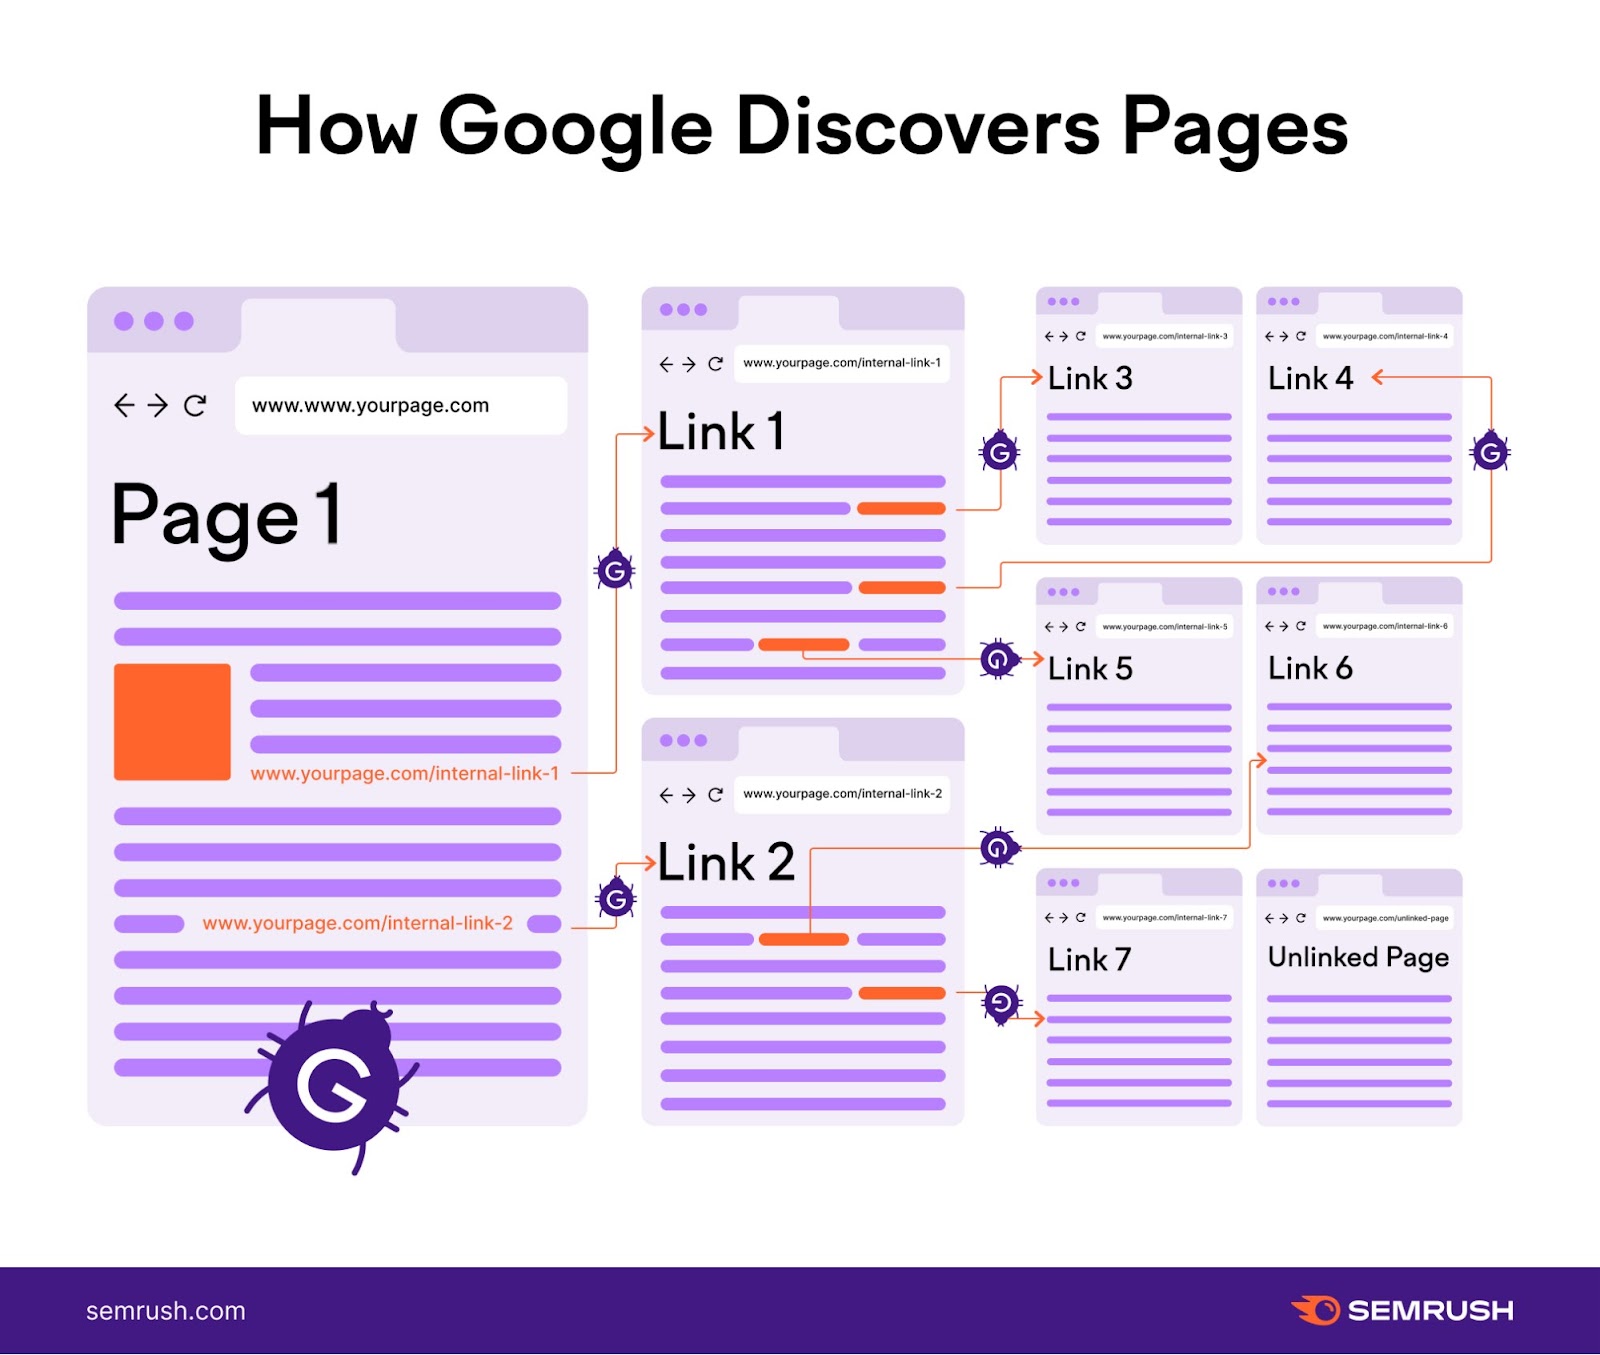 An infographic showing how Google discovers pages